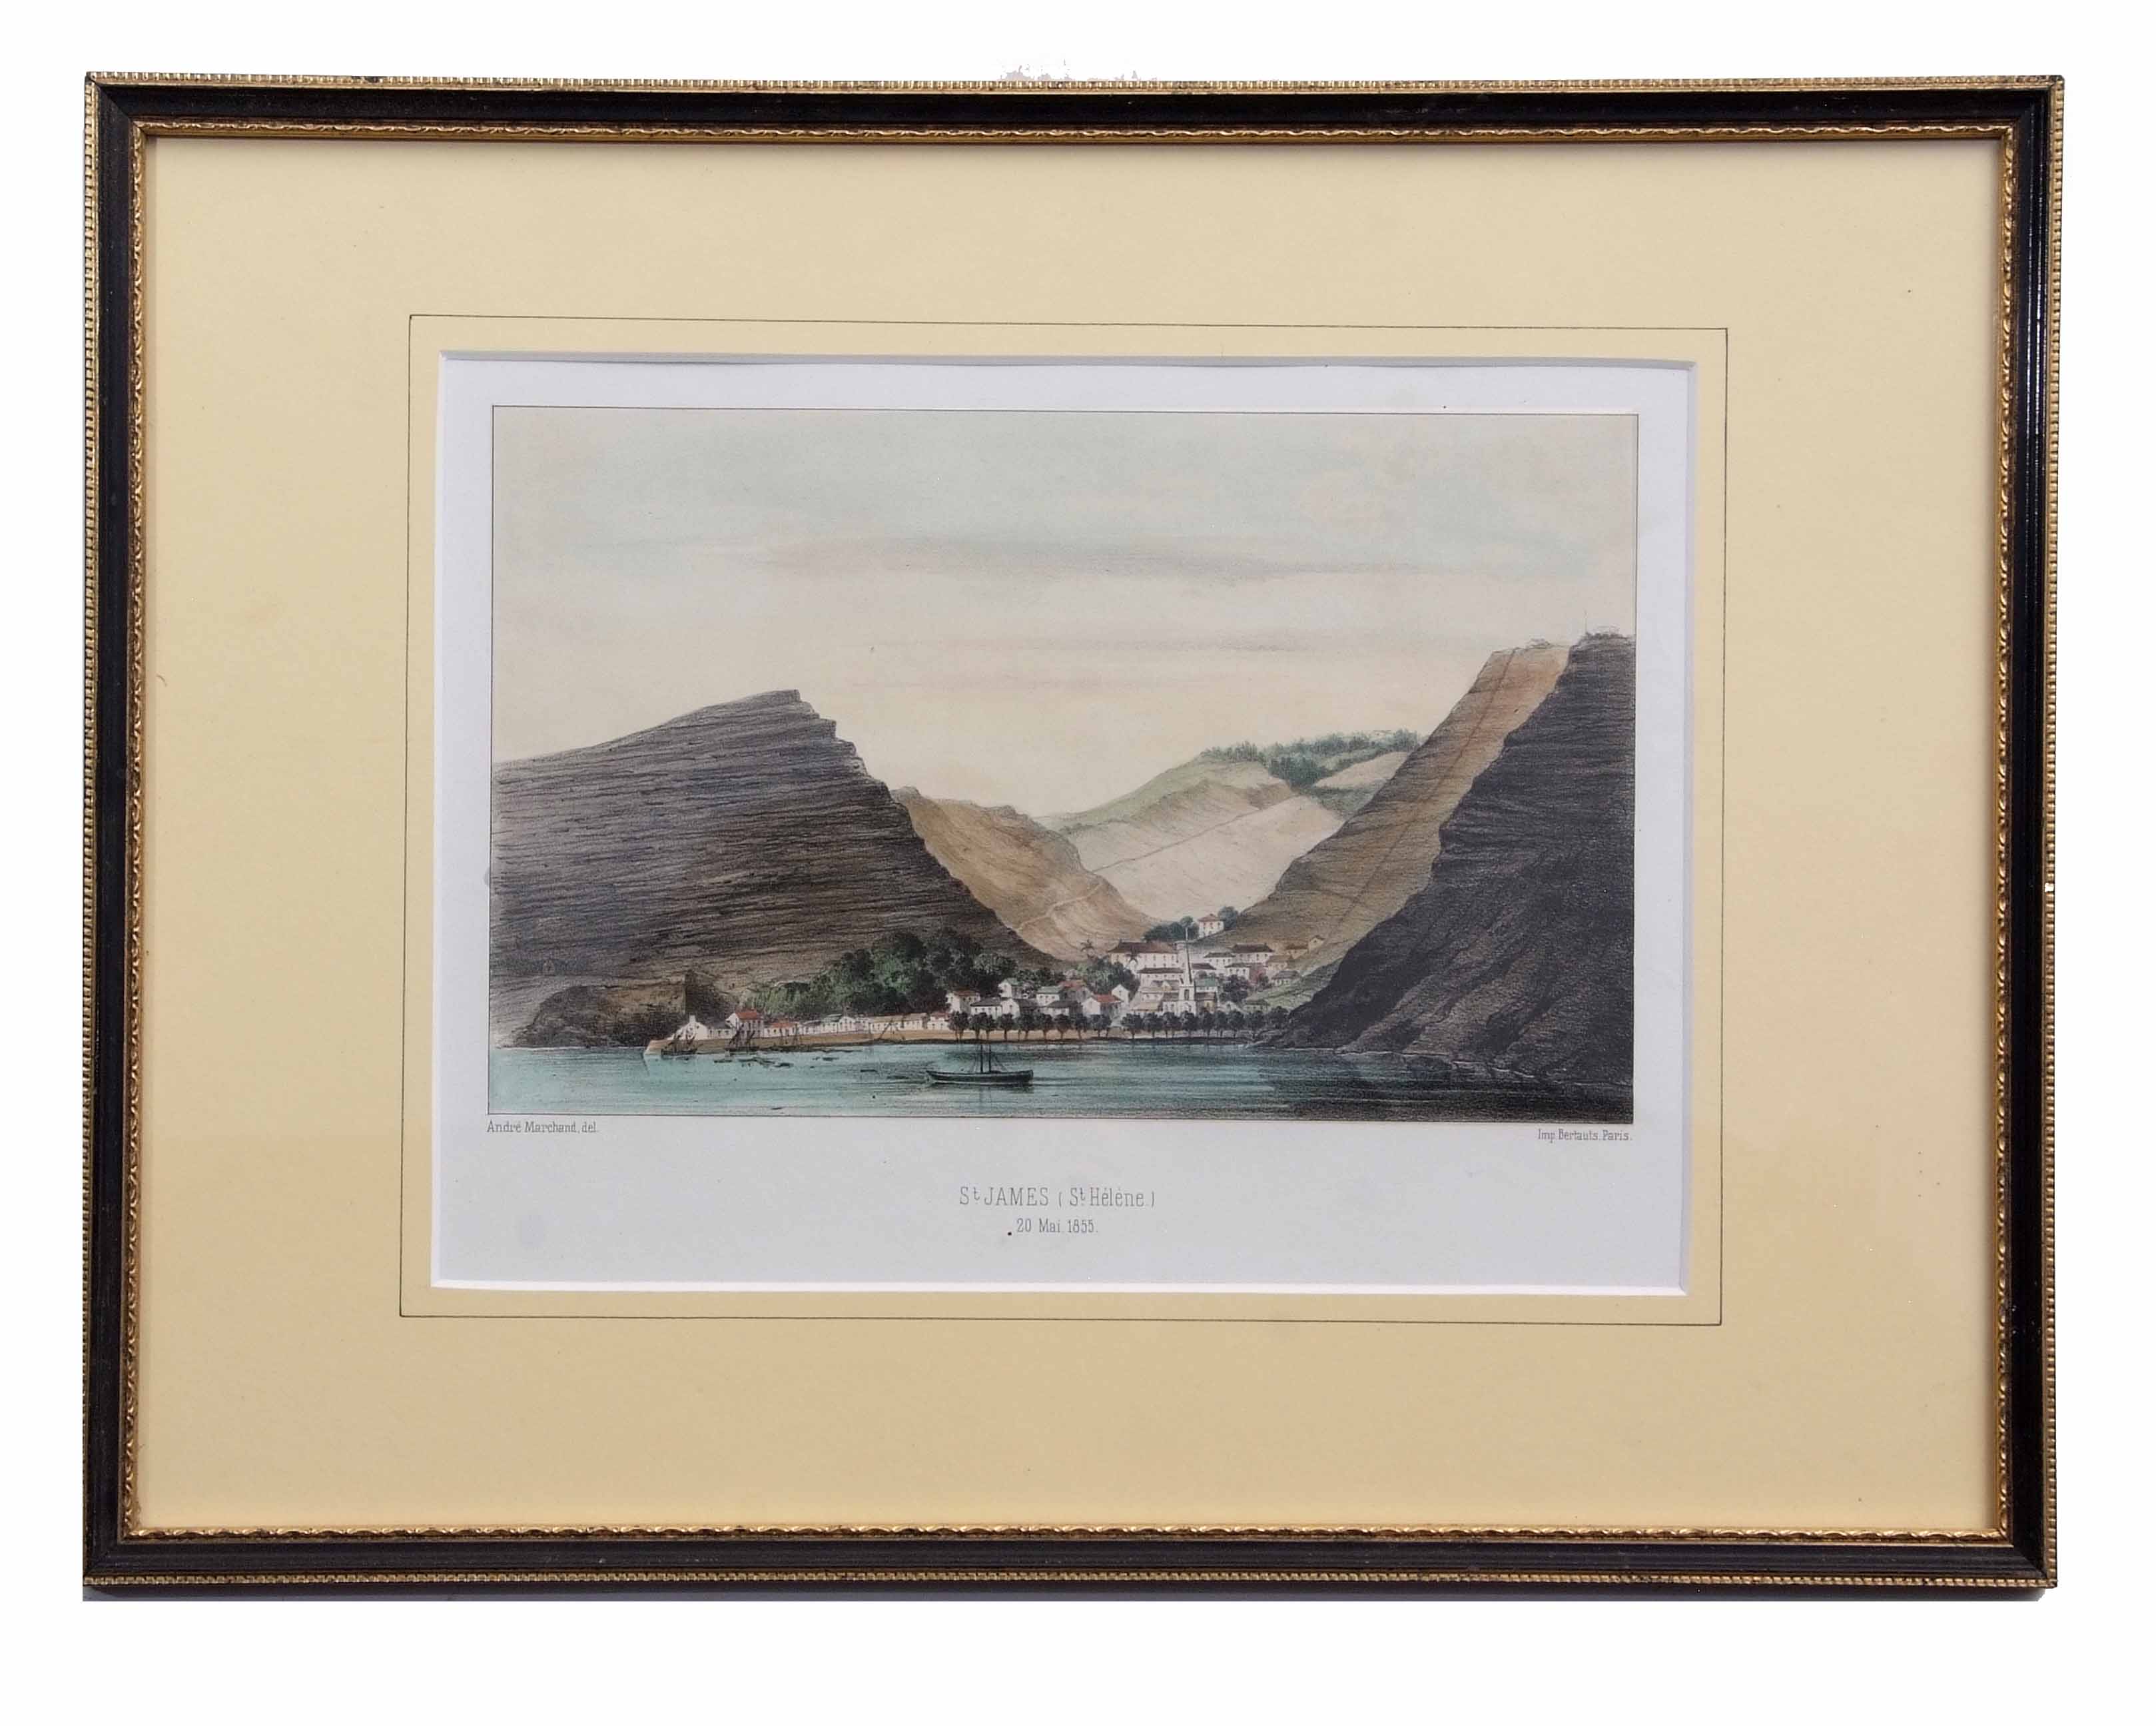 AFTER ANDRE MARCHAND, "Long Hood" and "St James (St Helena), pair of hand coloured lithographs, - Image 2 of 2